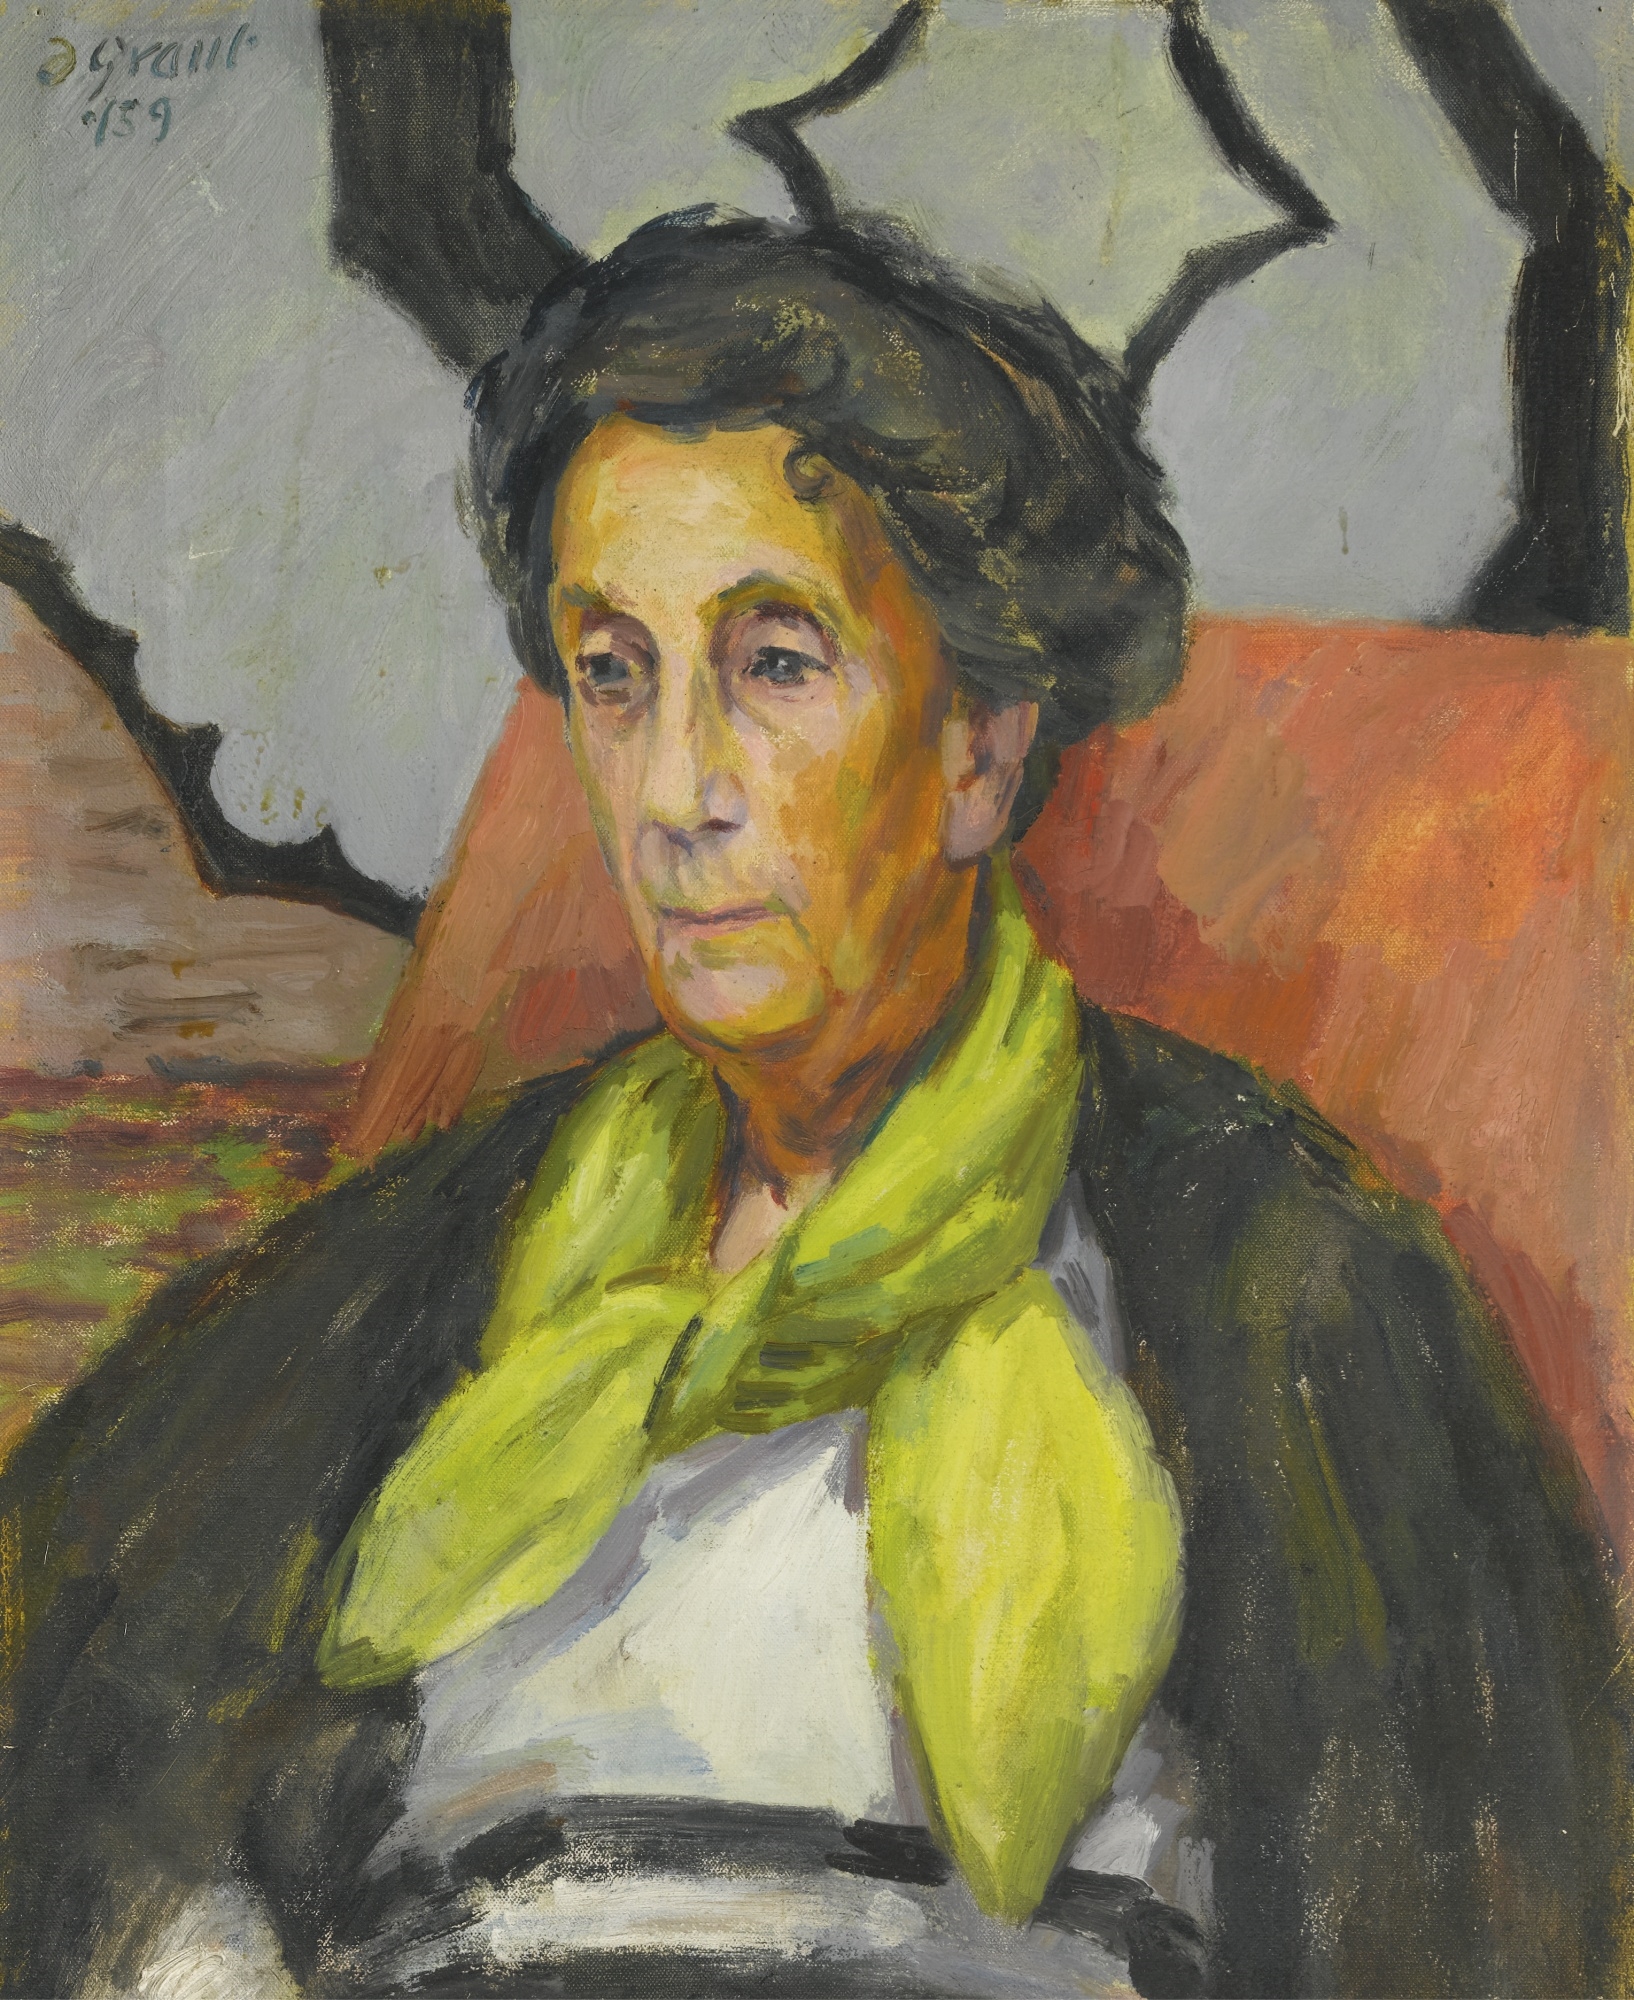 PORTRAIT OF MRS HAMMERSLEY IN A GREEN SCARF by Duncan Grant, 1959